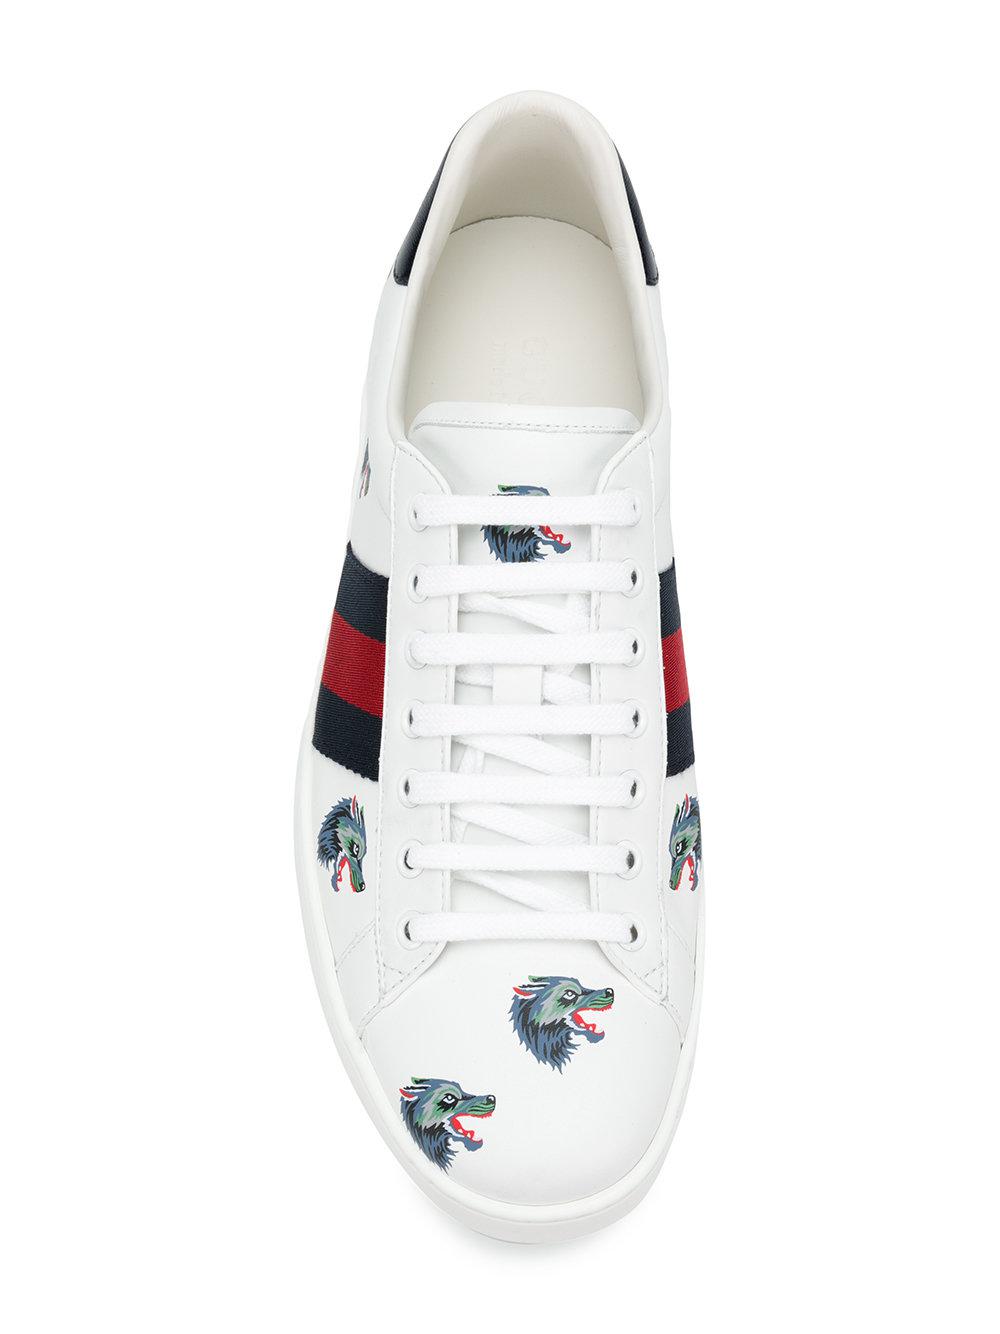 Gucci Leather Ace Wolf-embroidered Sneakers in White - Lyst